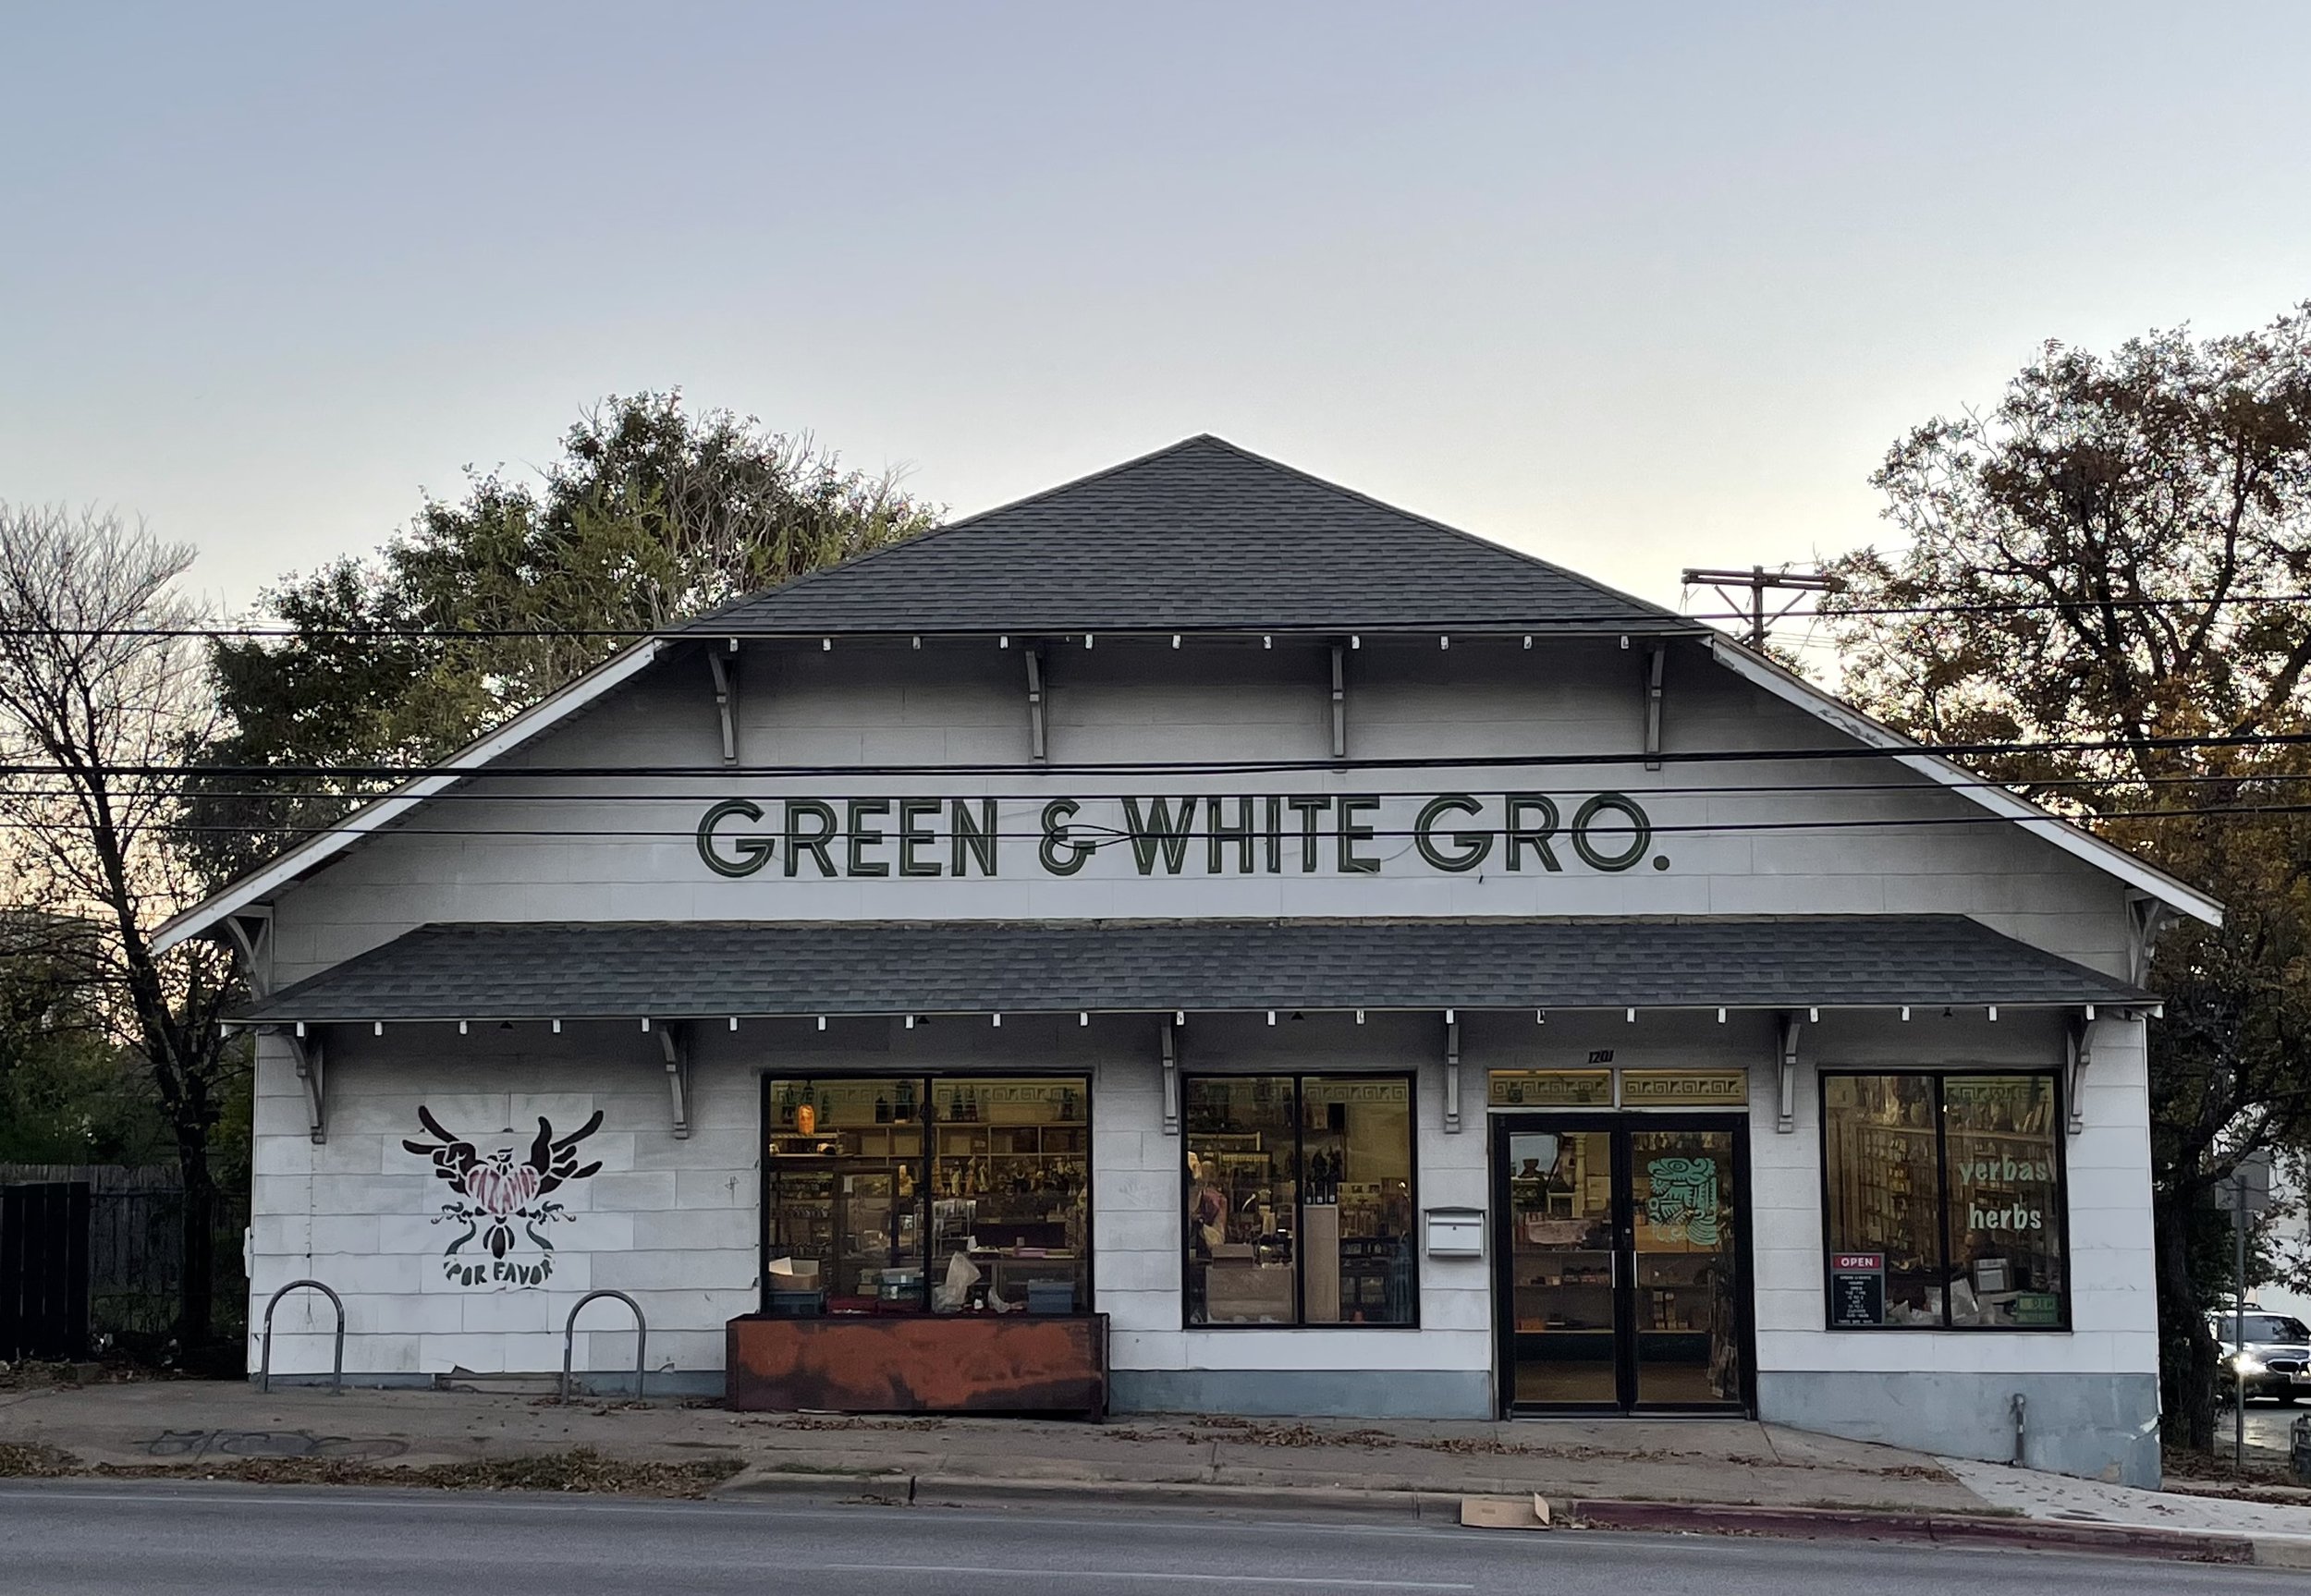 7_Green and White Grocery.jpg